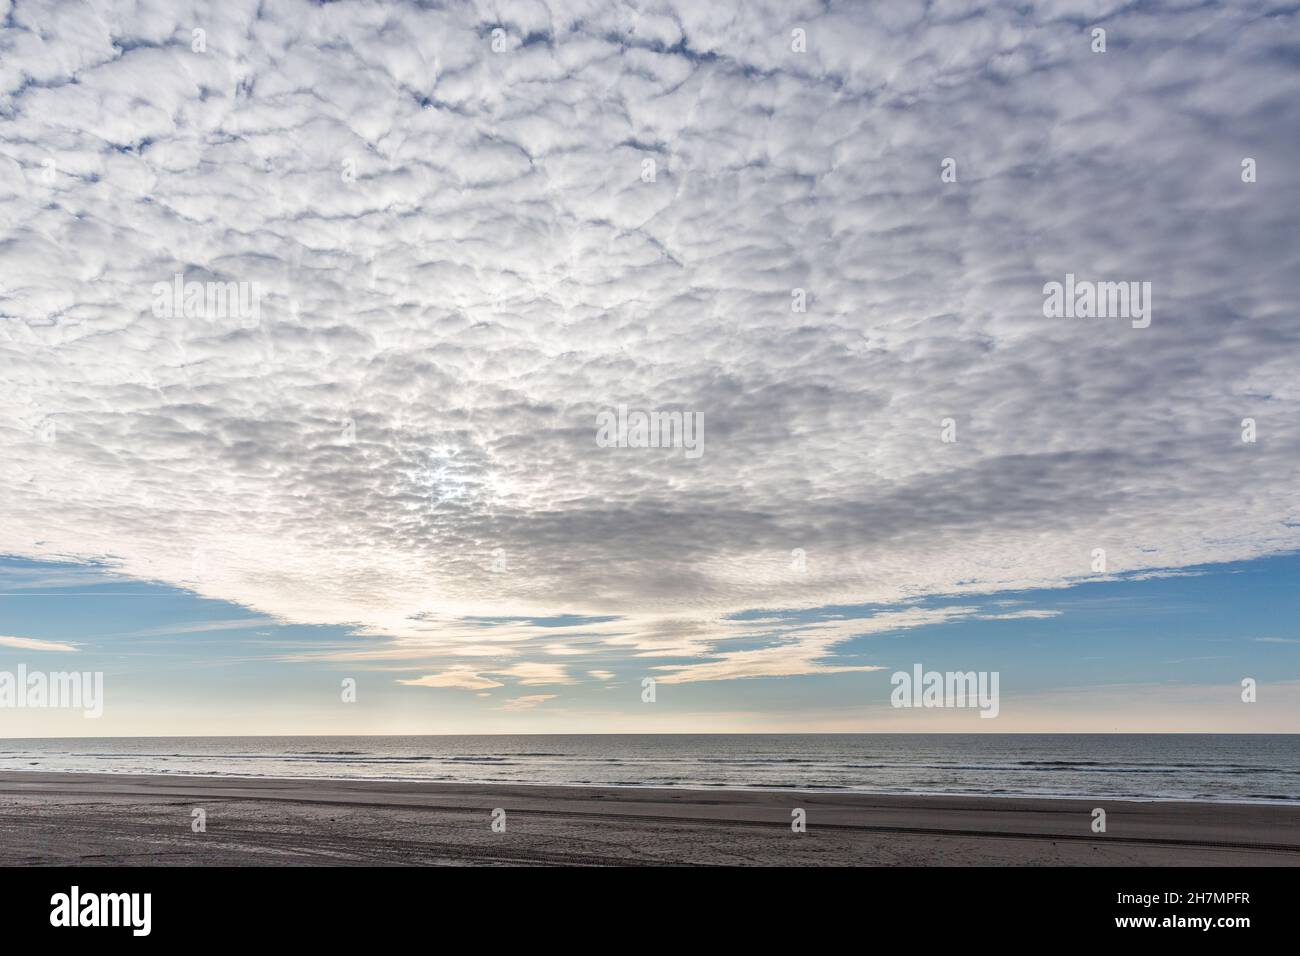 Cloud bank above the Baie de Somme, seen from Fort Mahon, France Stock Photo